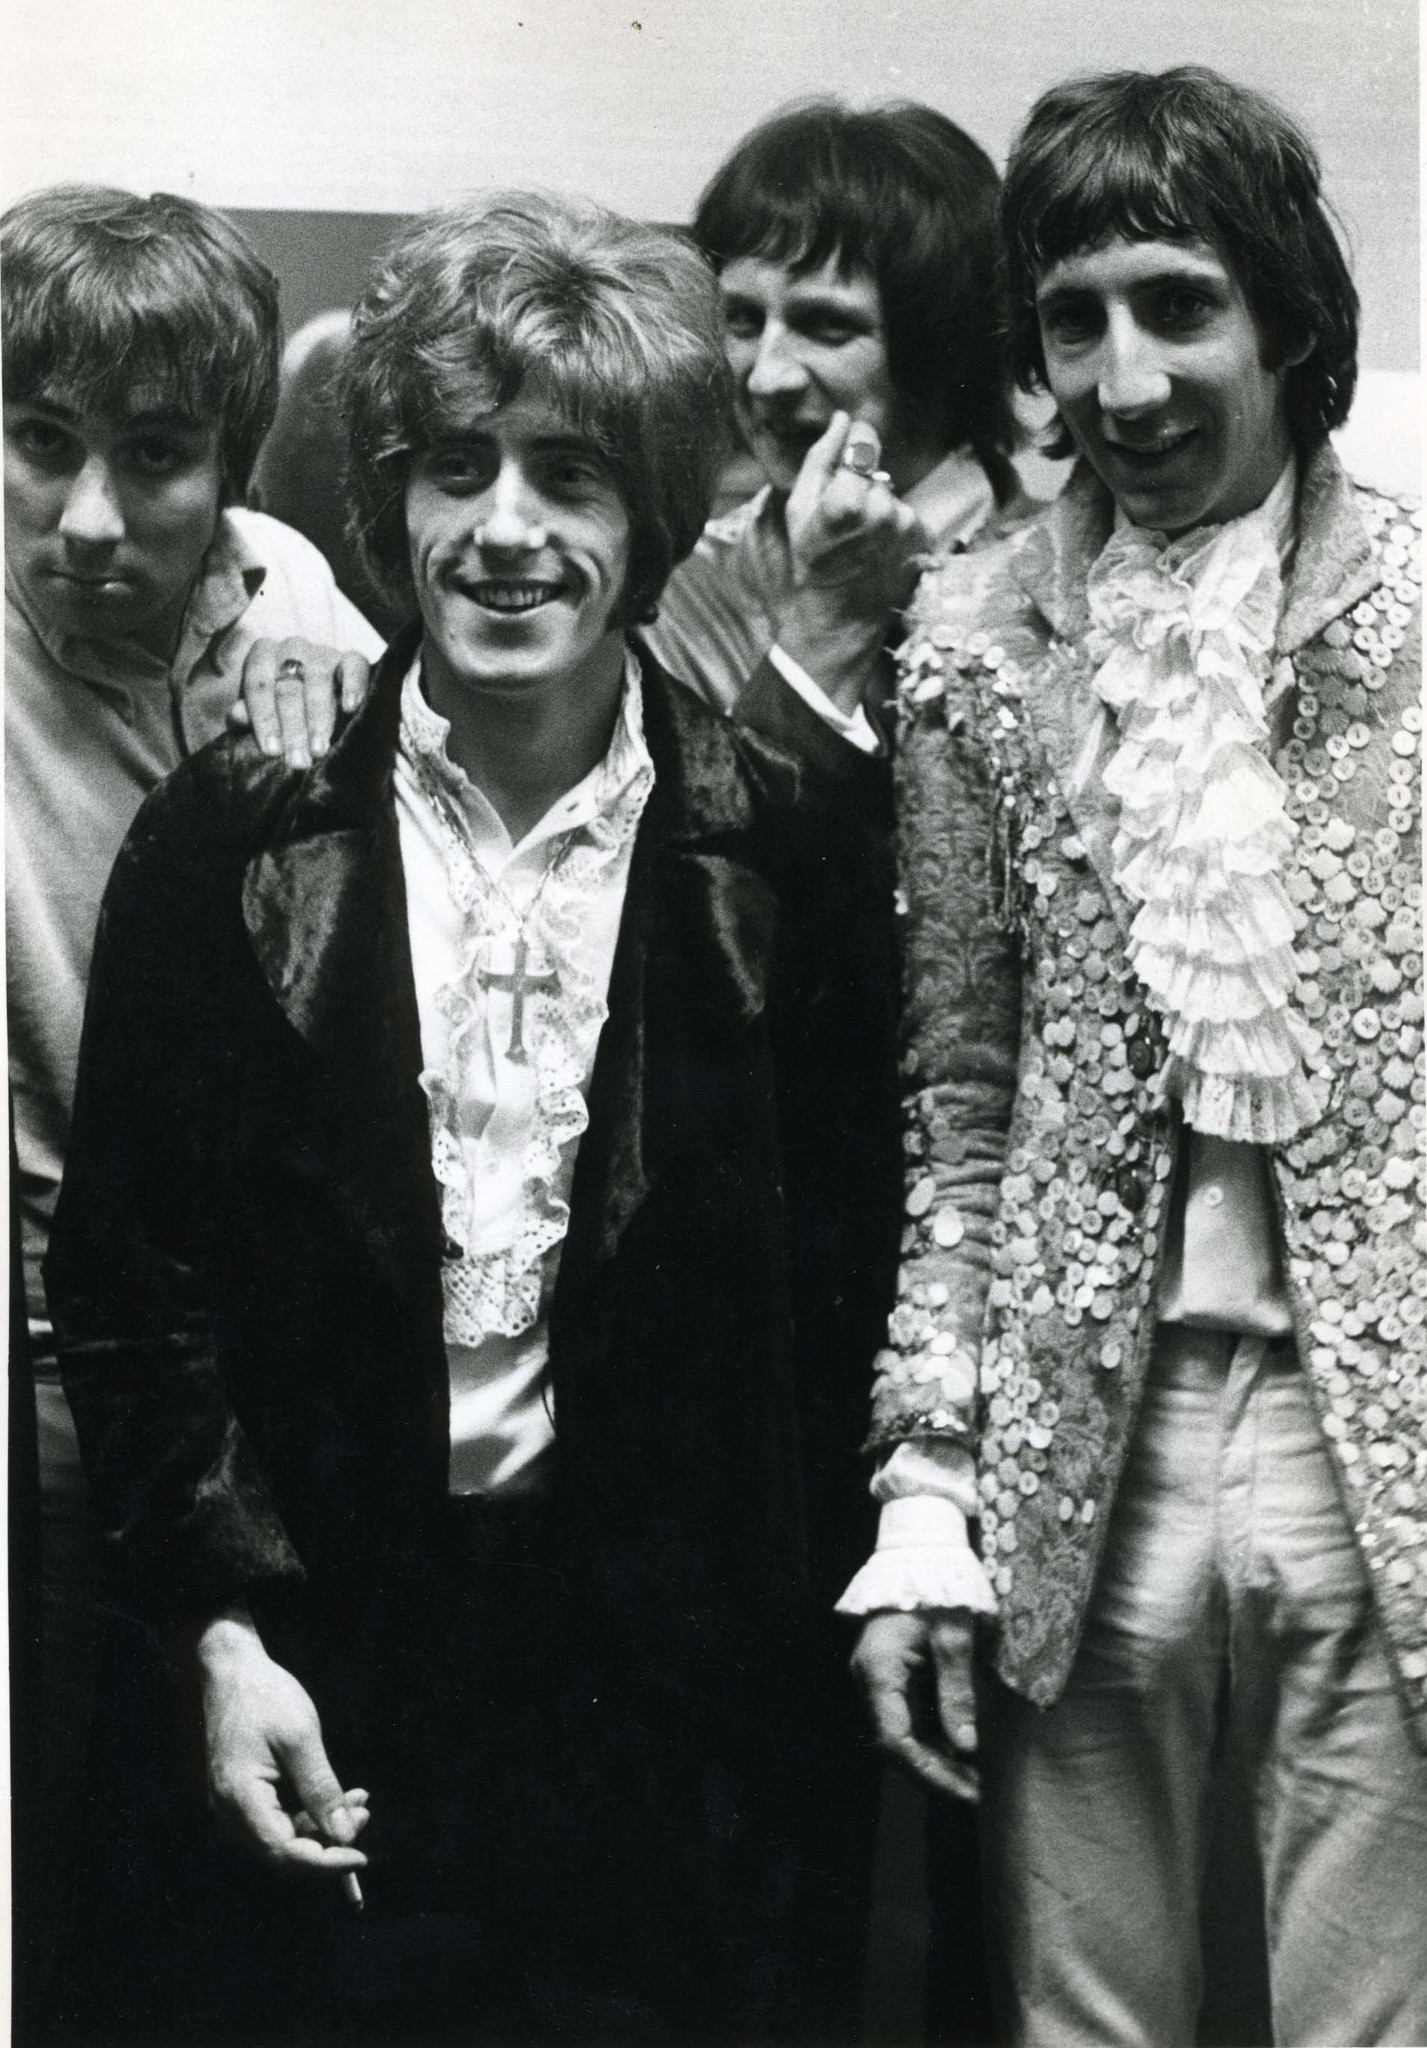 Still of Roger Daltrey, Keith Moon, John Entwistle and Pete Townshend in Amazing Journey: The Story of The Who (2007)